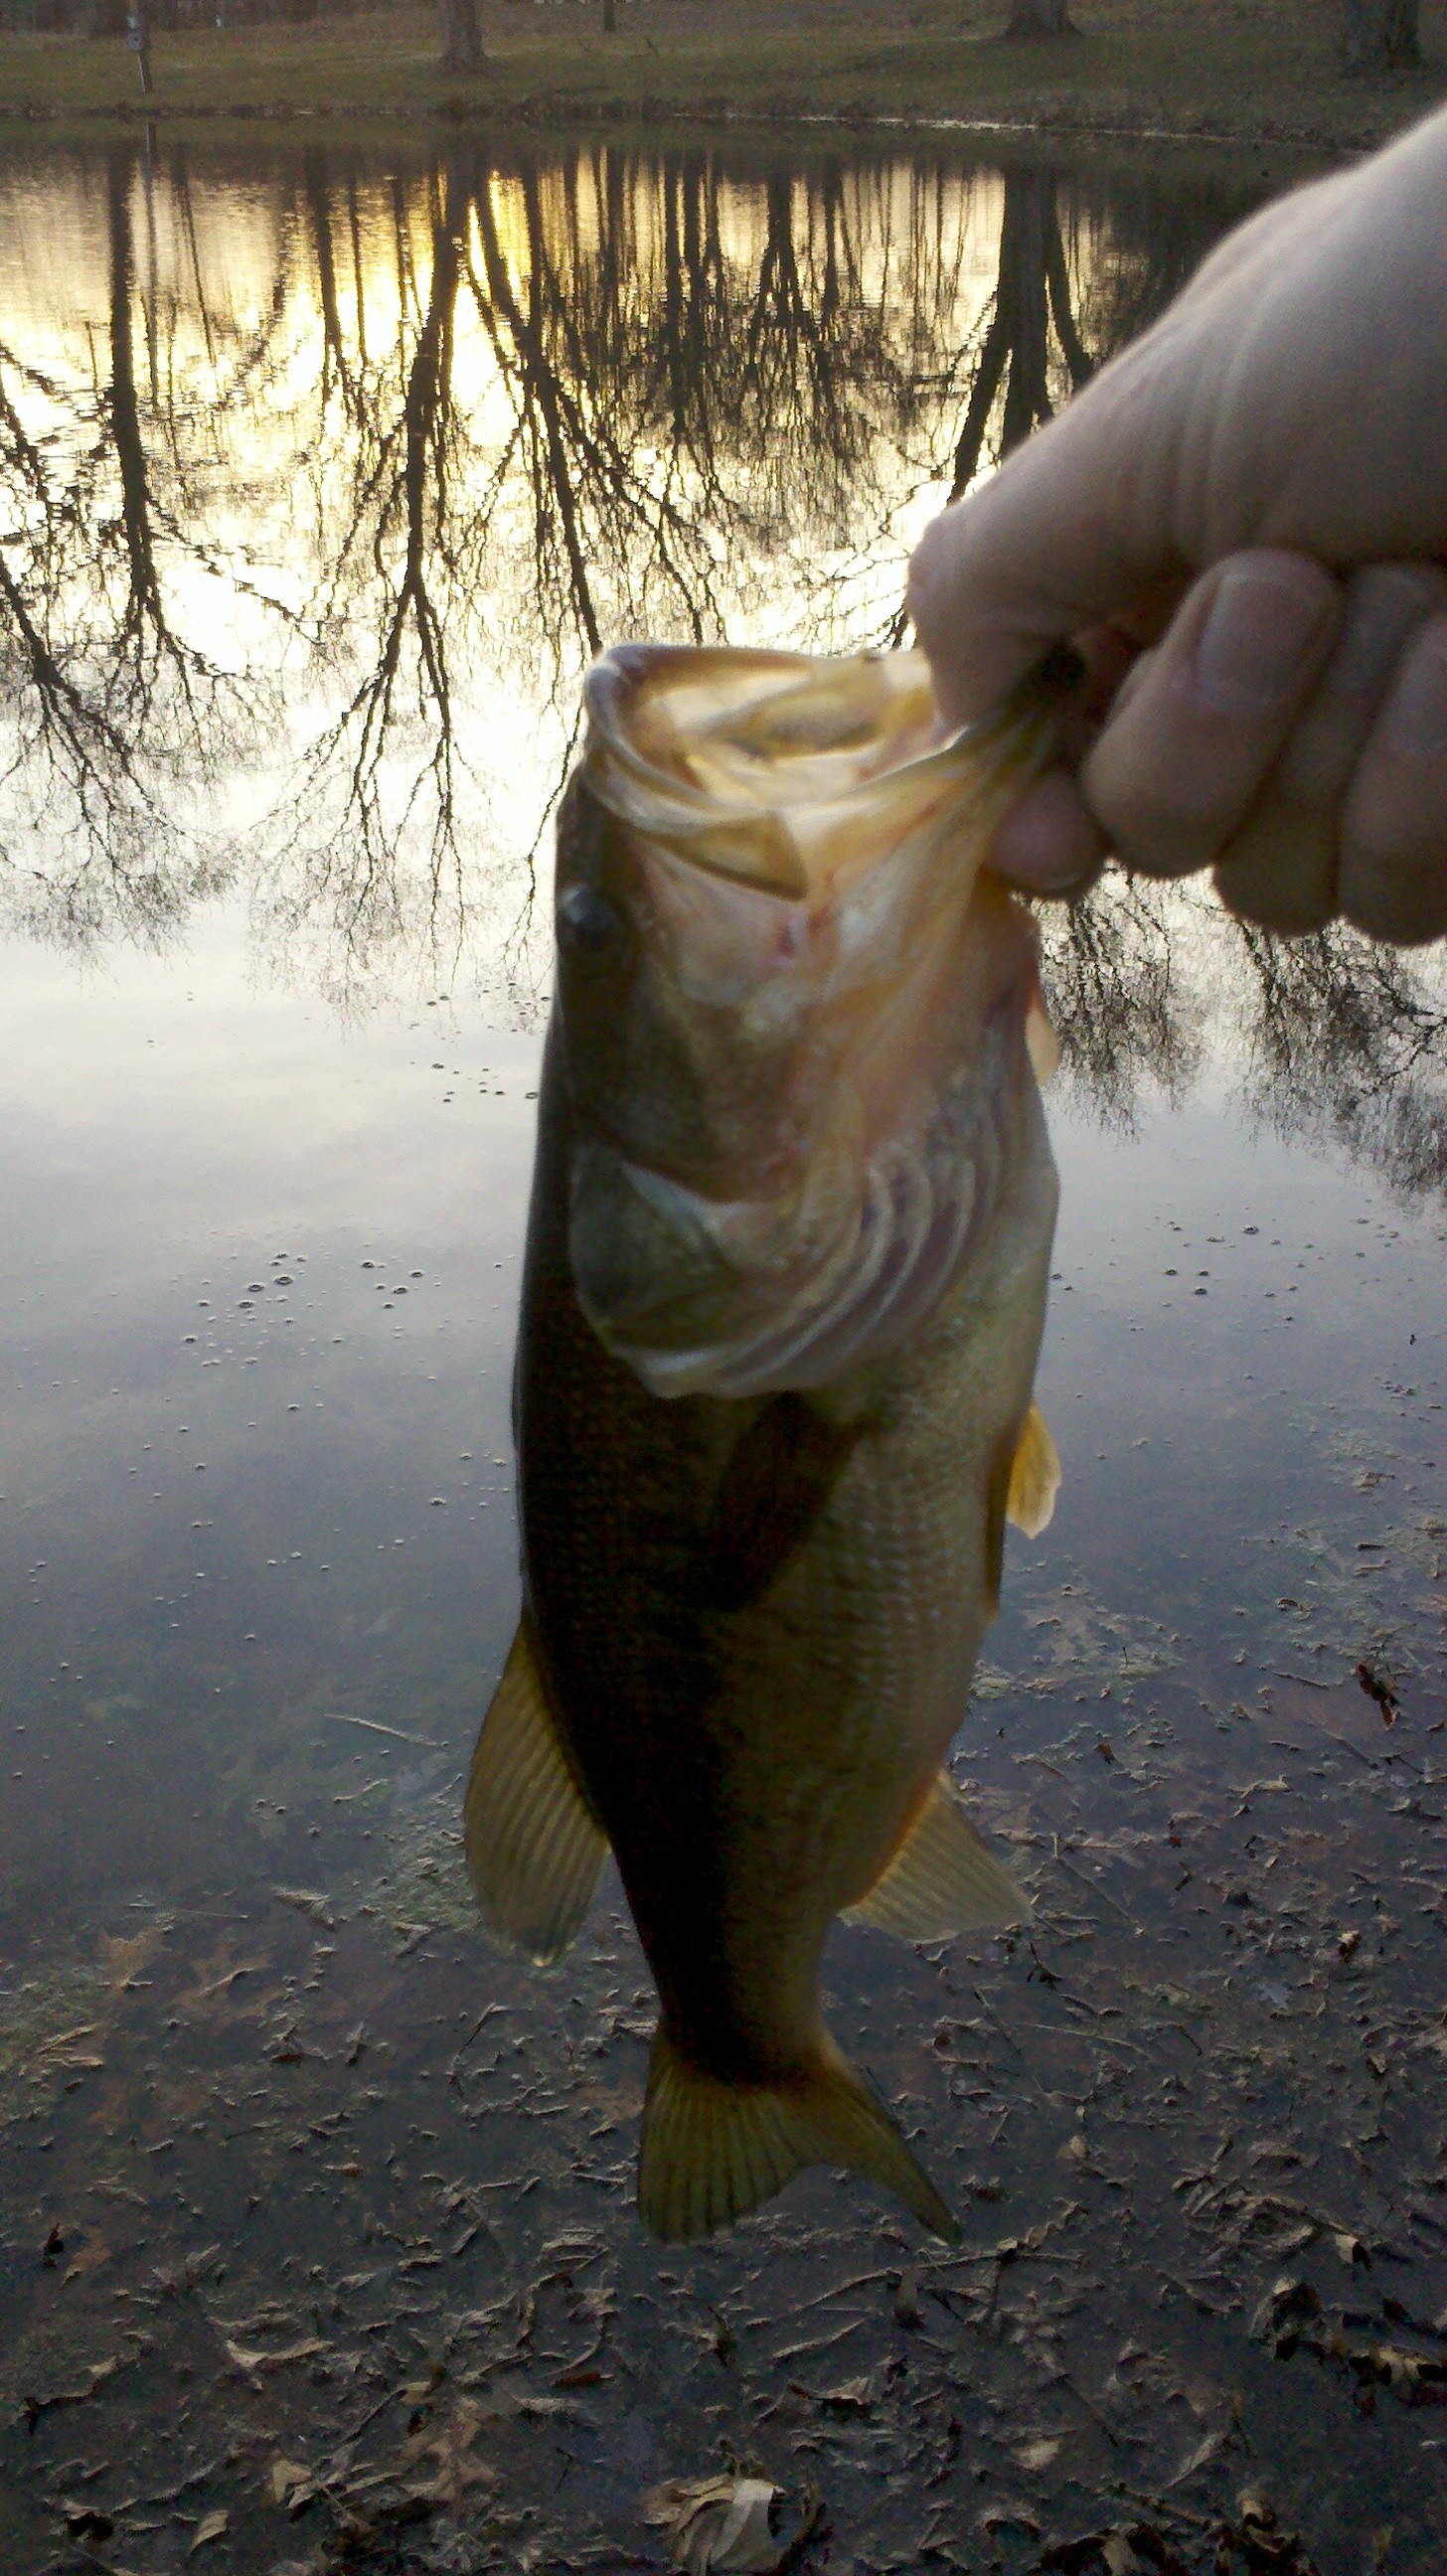 My right hand holding a largemough bass over a pond with a reflection of trees and the sunset